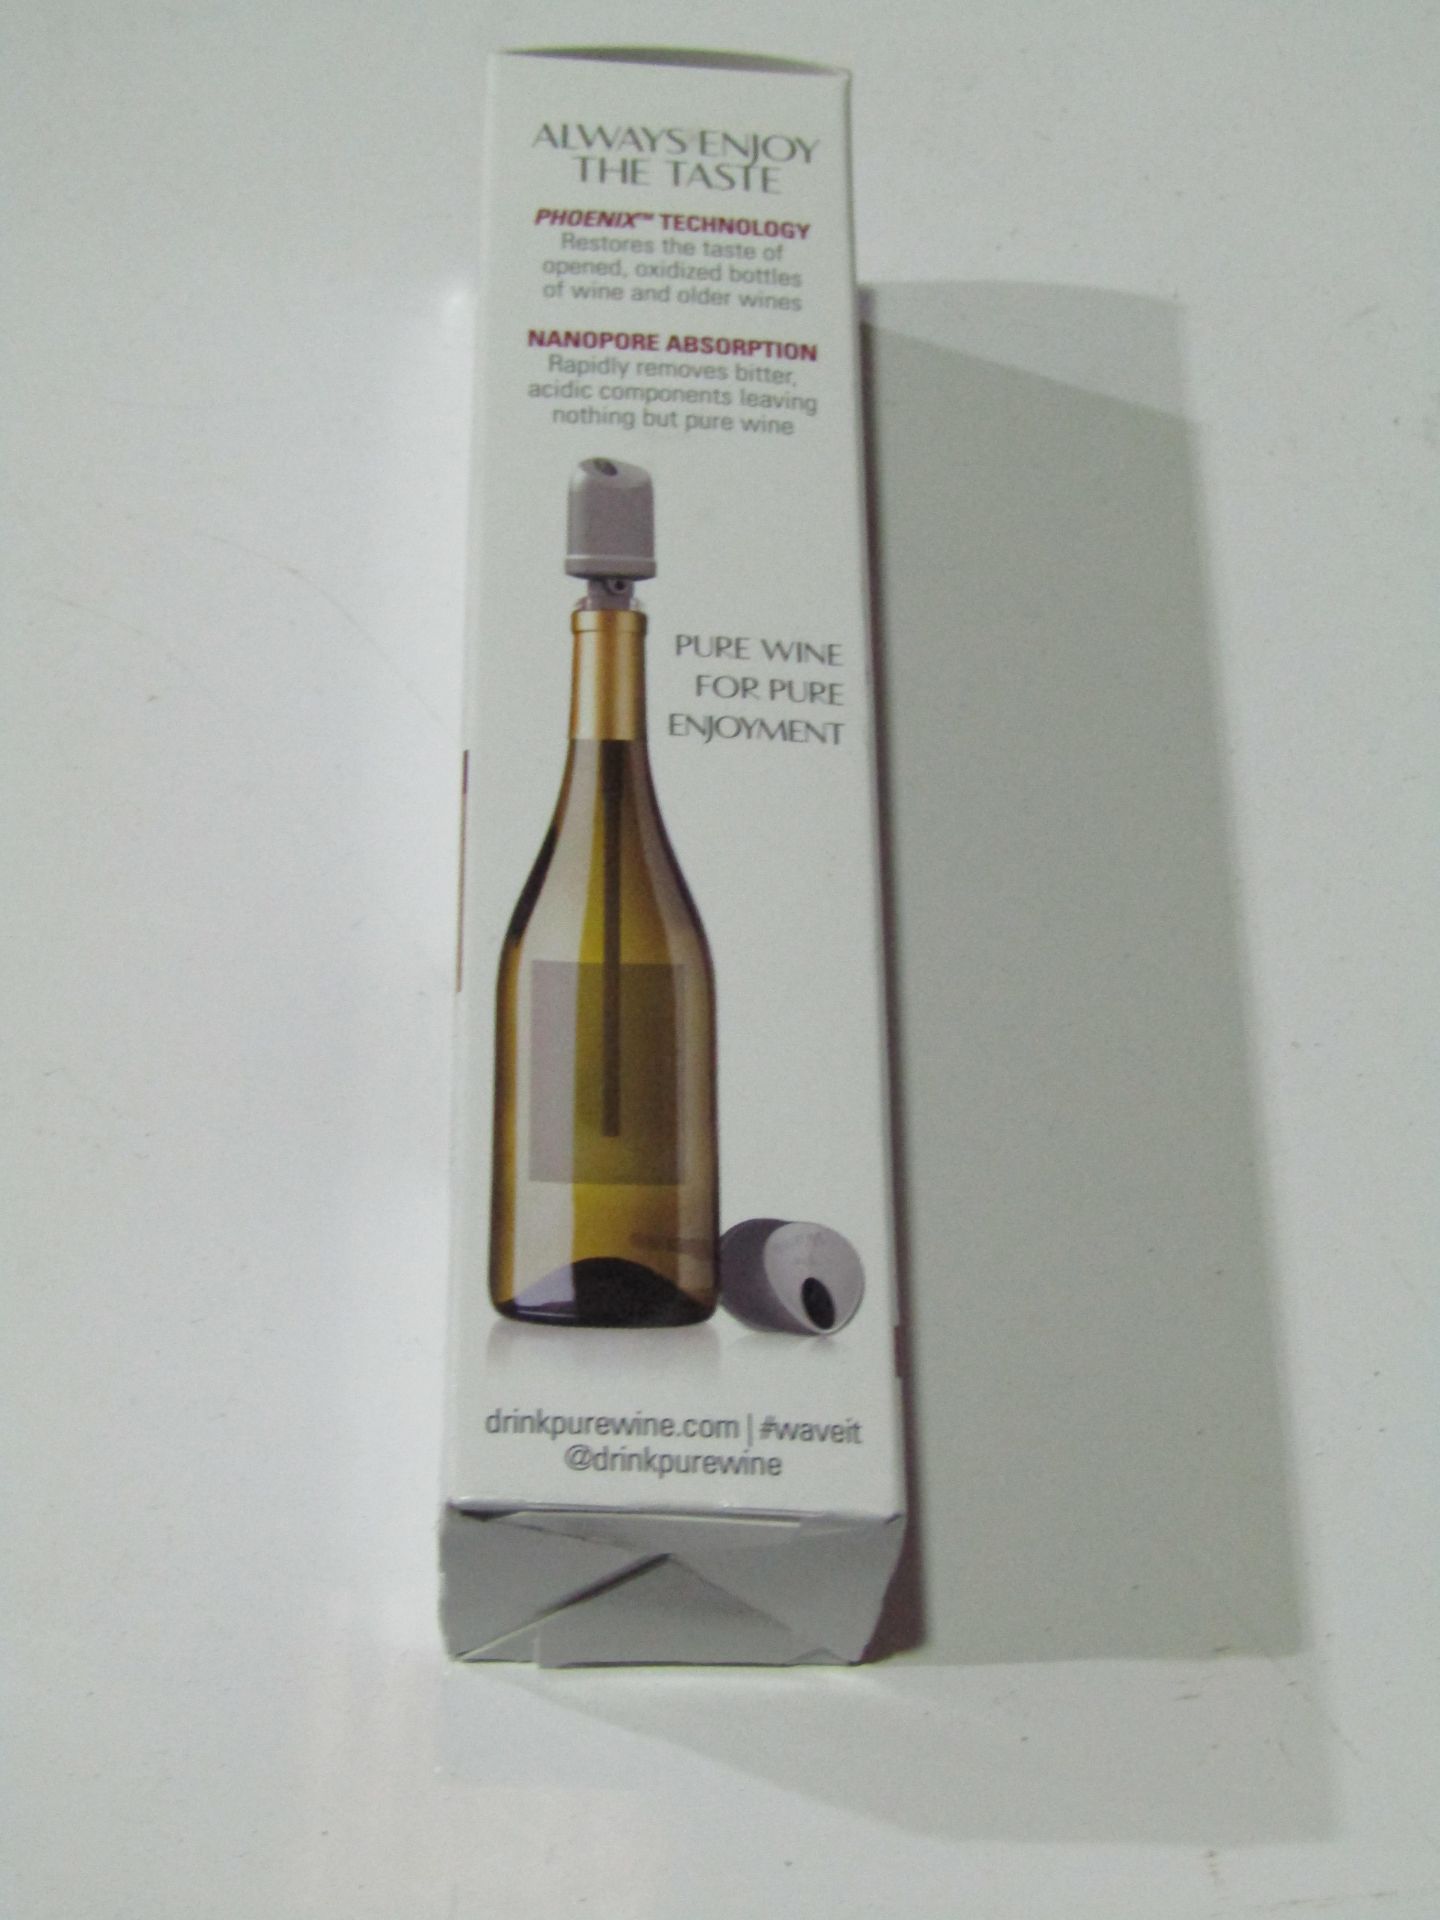 5x The Wave Wine Filter & Aerator. Filters Both Histamines & Sulfites - New & Boxed.